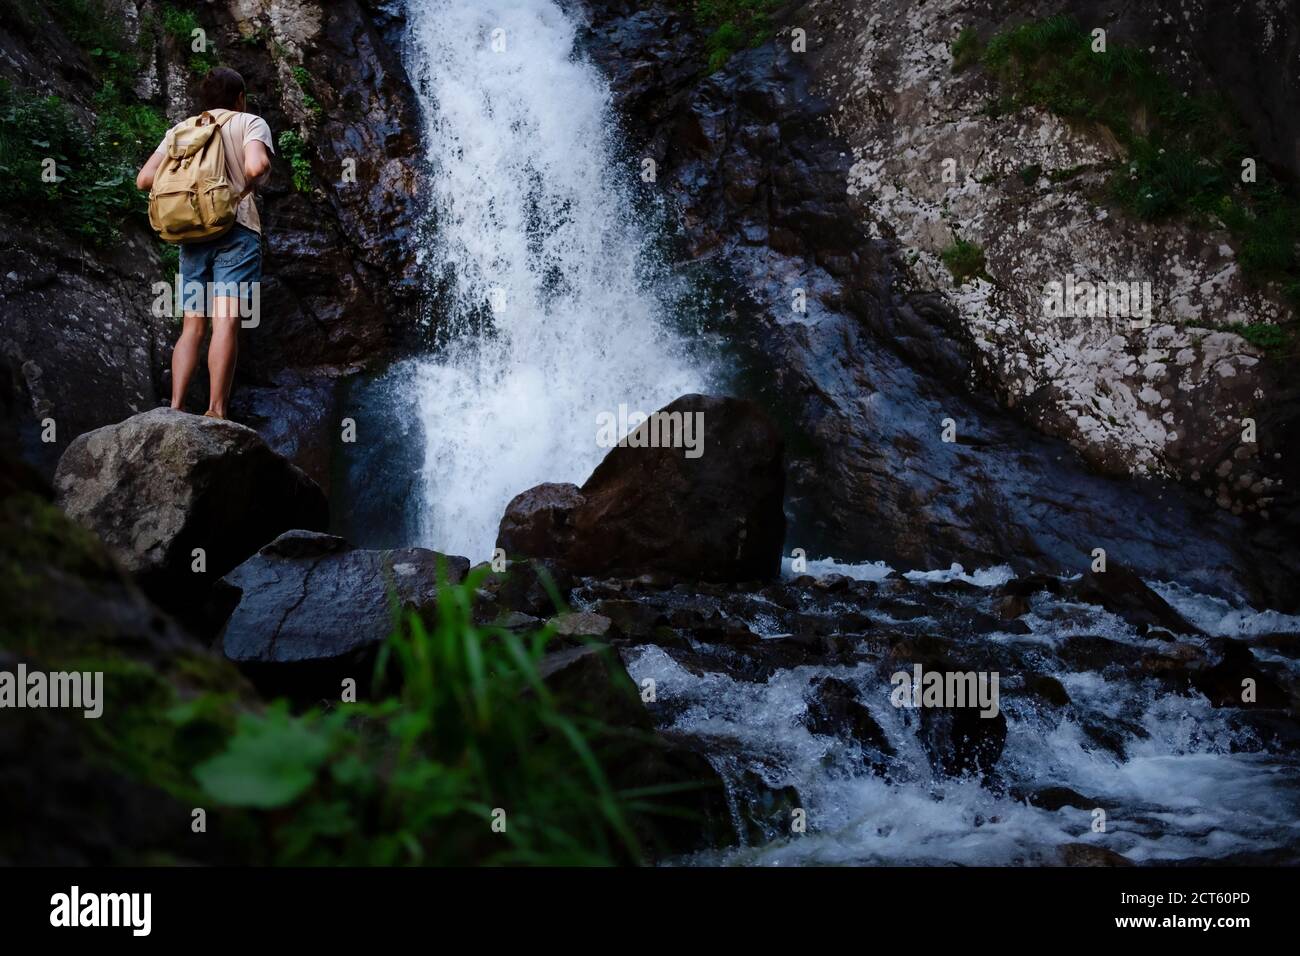 Hiker waalkinh with backpack looking at waterfall in park in beautiful nature landscape. Portrait of male adult back standing outdoor. Waterfall Shumk Stock Photo